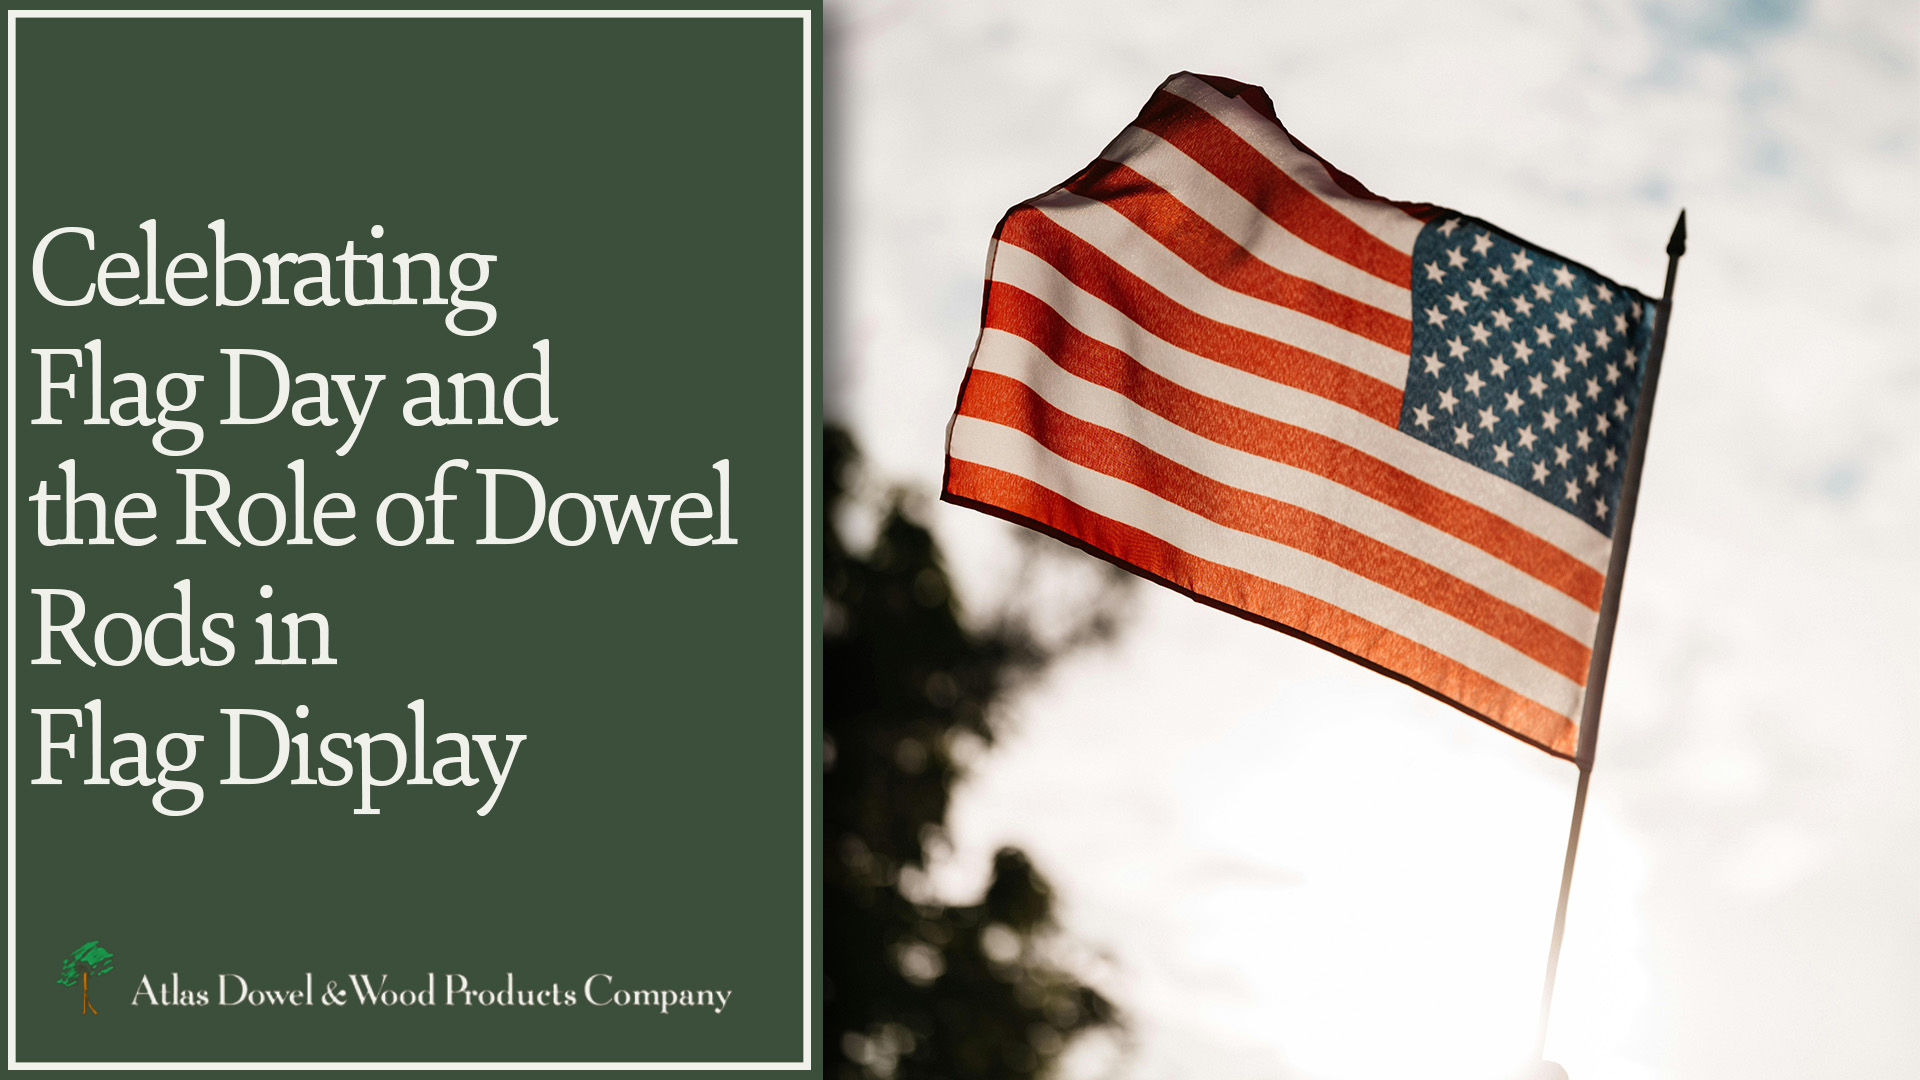 Celebrating Flag Day and the Role of Dowel Rods in Flag Display